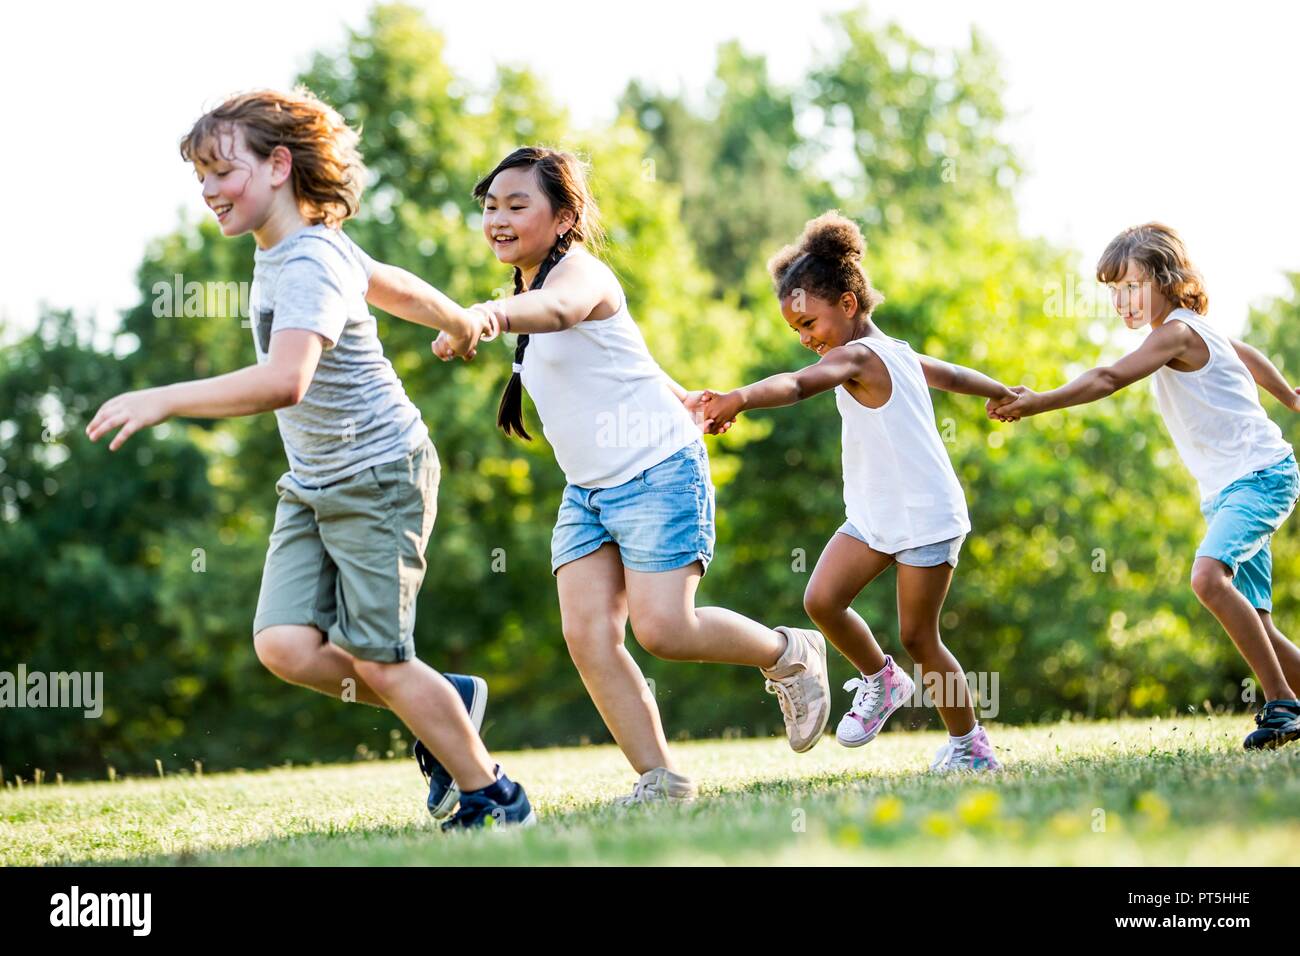 Children holding hands and running in park, smiling. Stock Photo